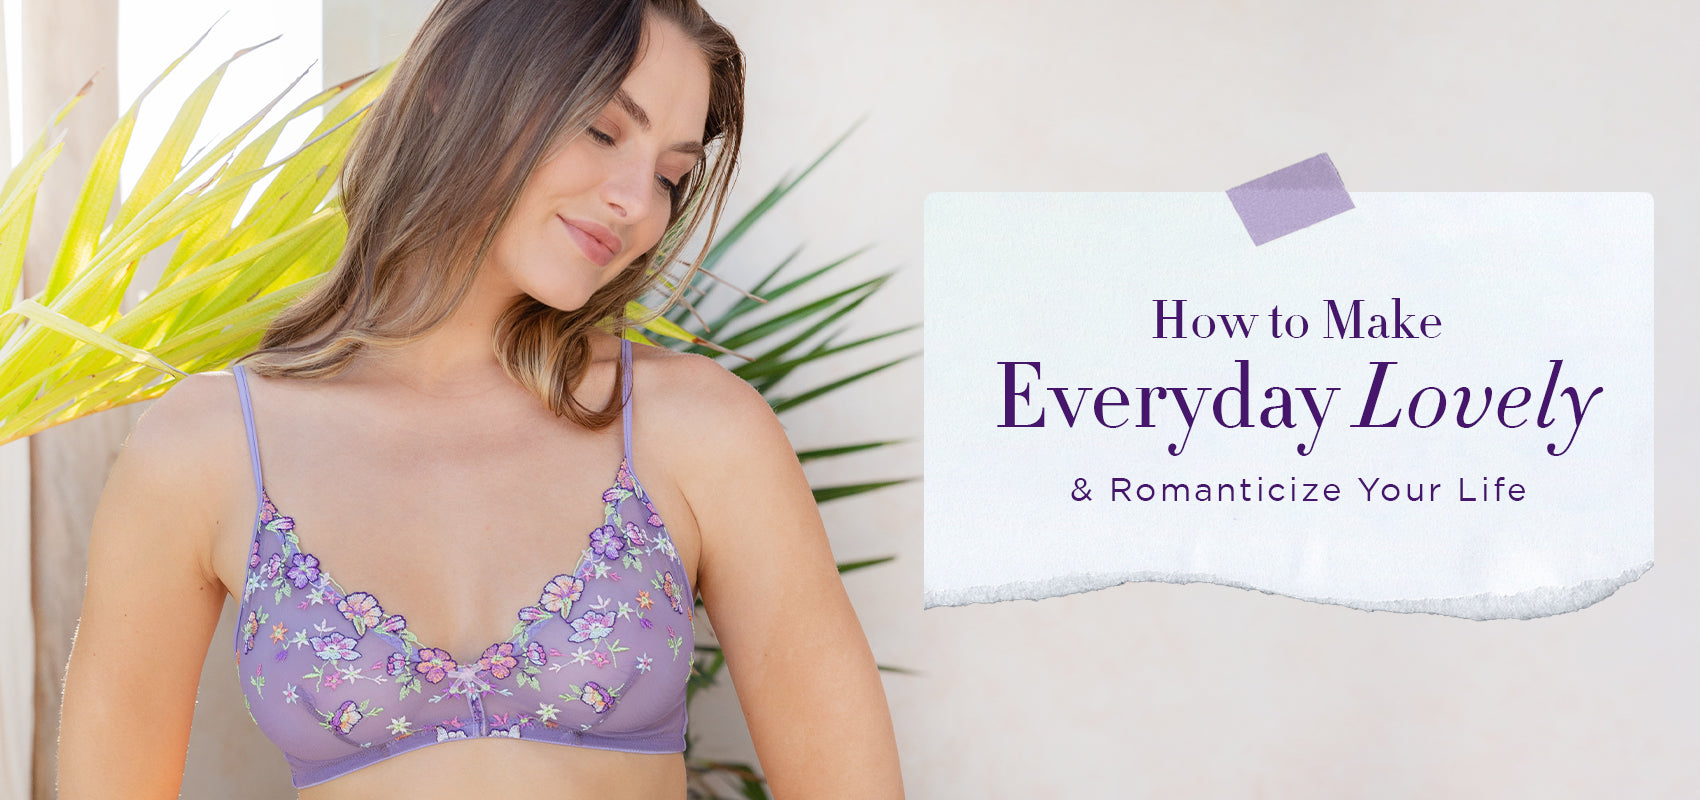 How to Make Everyday Lovely and Romanticize Your Life